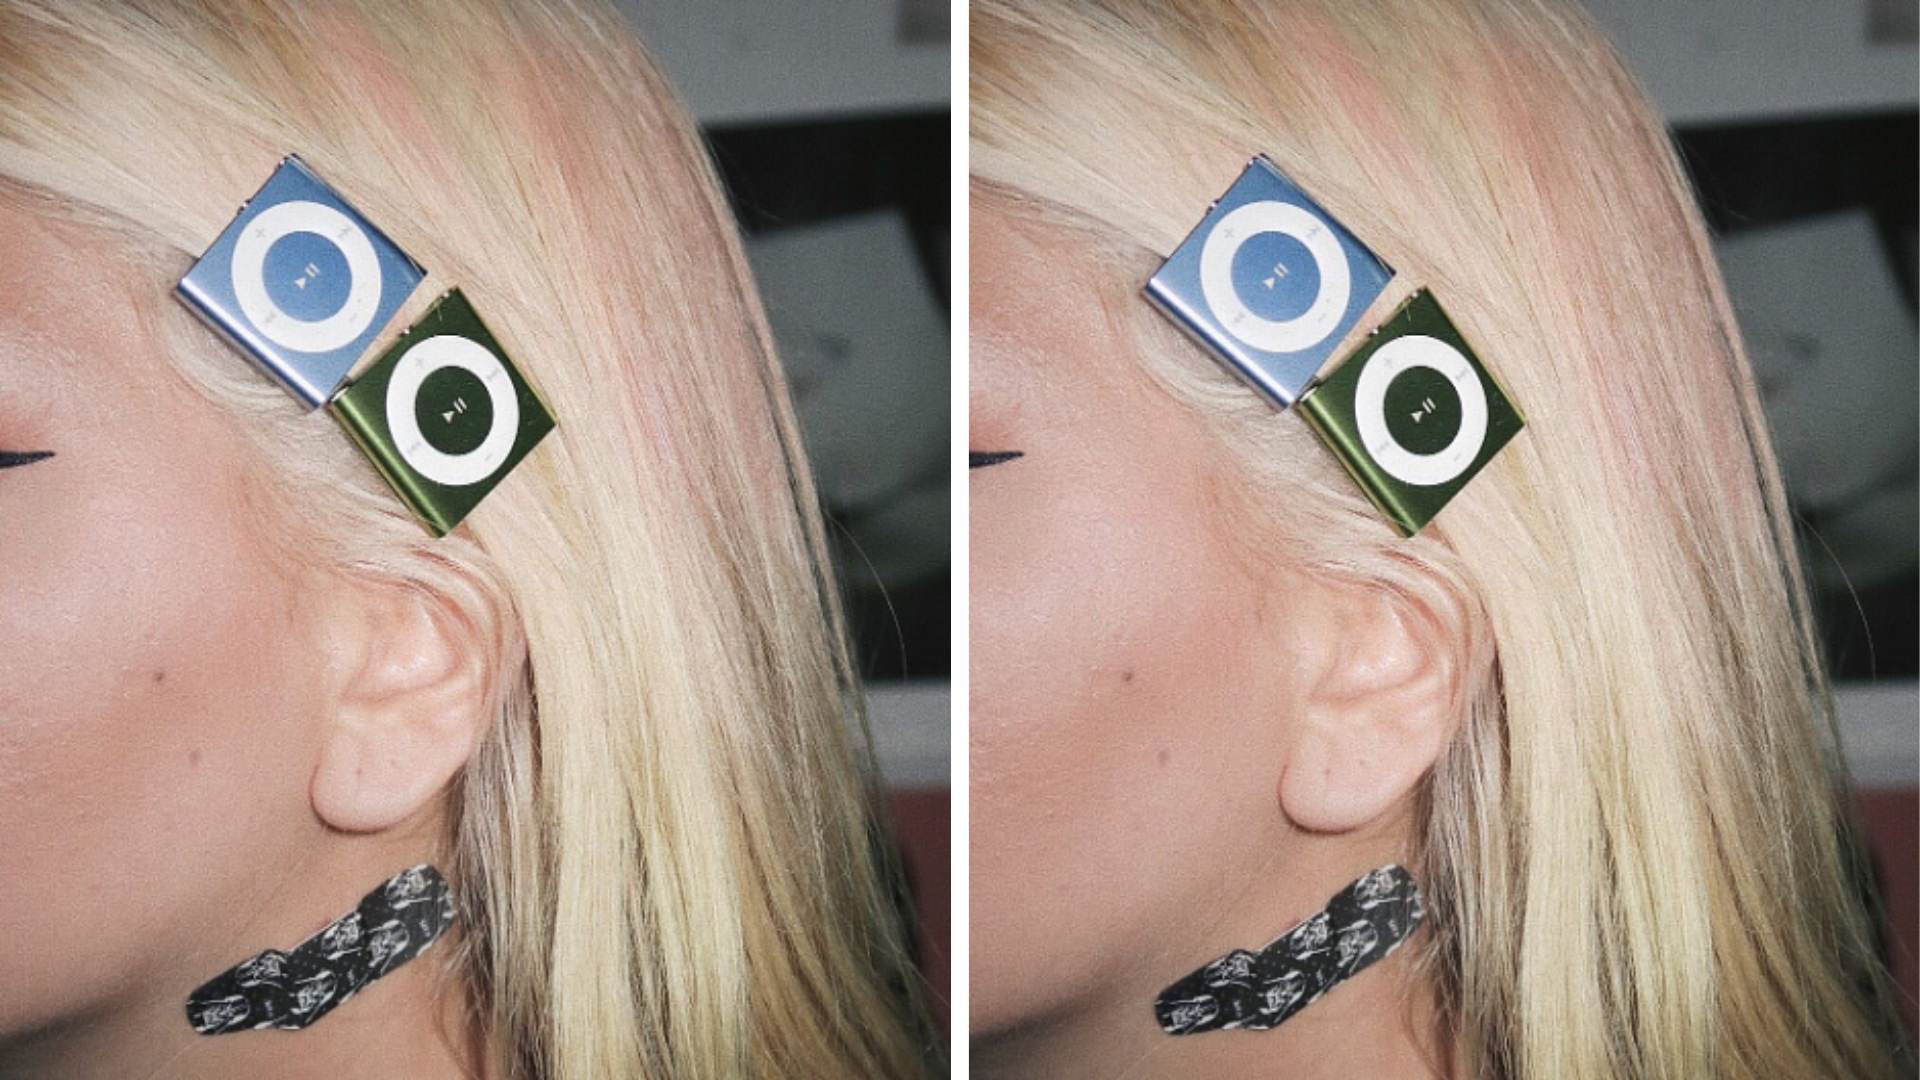 Blonde hair with two iPod shuffles as hair clips in the colors blue and green.